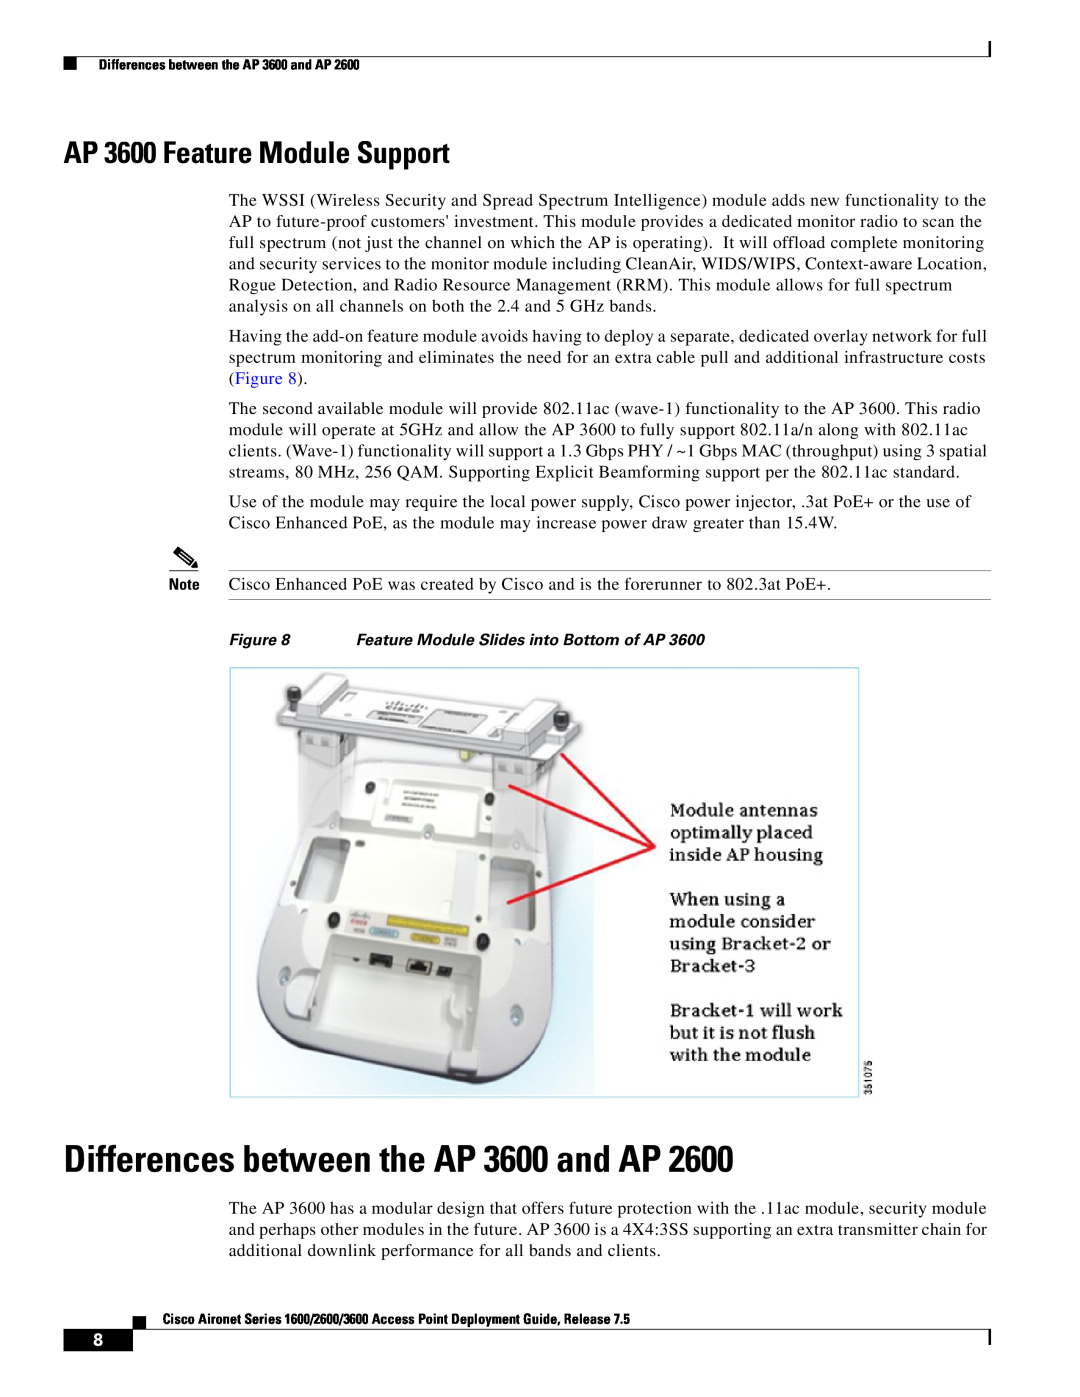 Cisco Systems AIRRM3000ACAK9 manual Differences between the AP 3600 and AP, AP 3600 Feature Module Support 